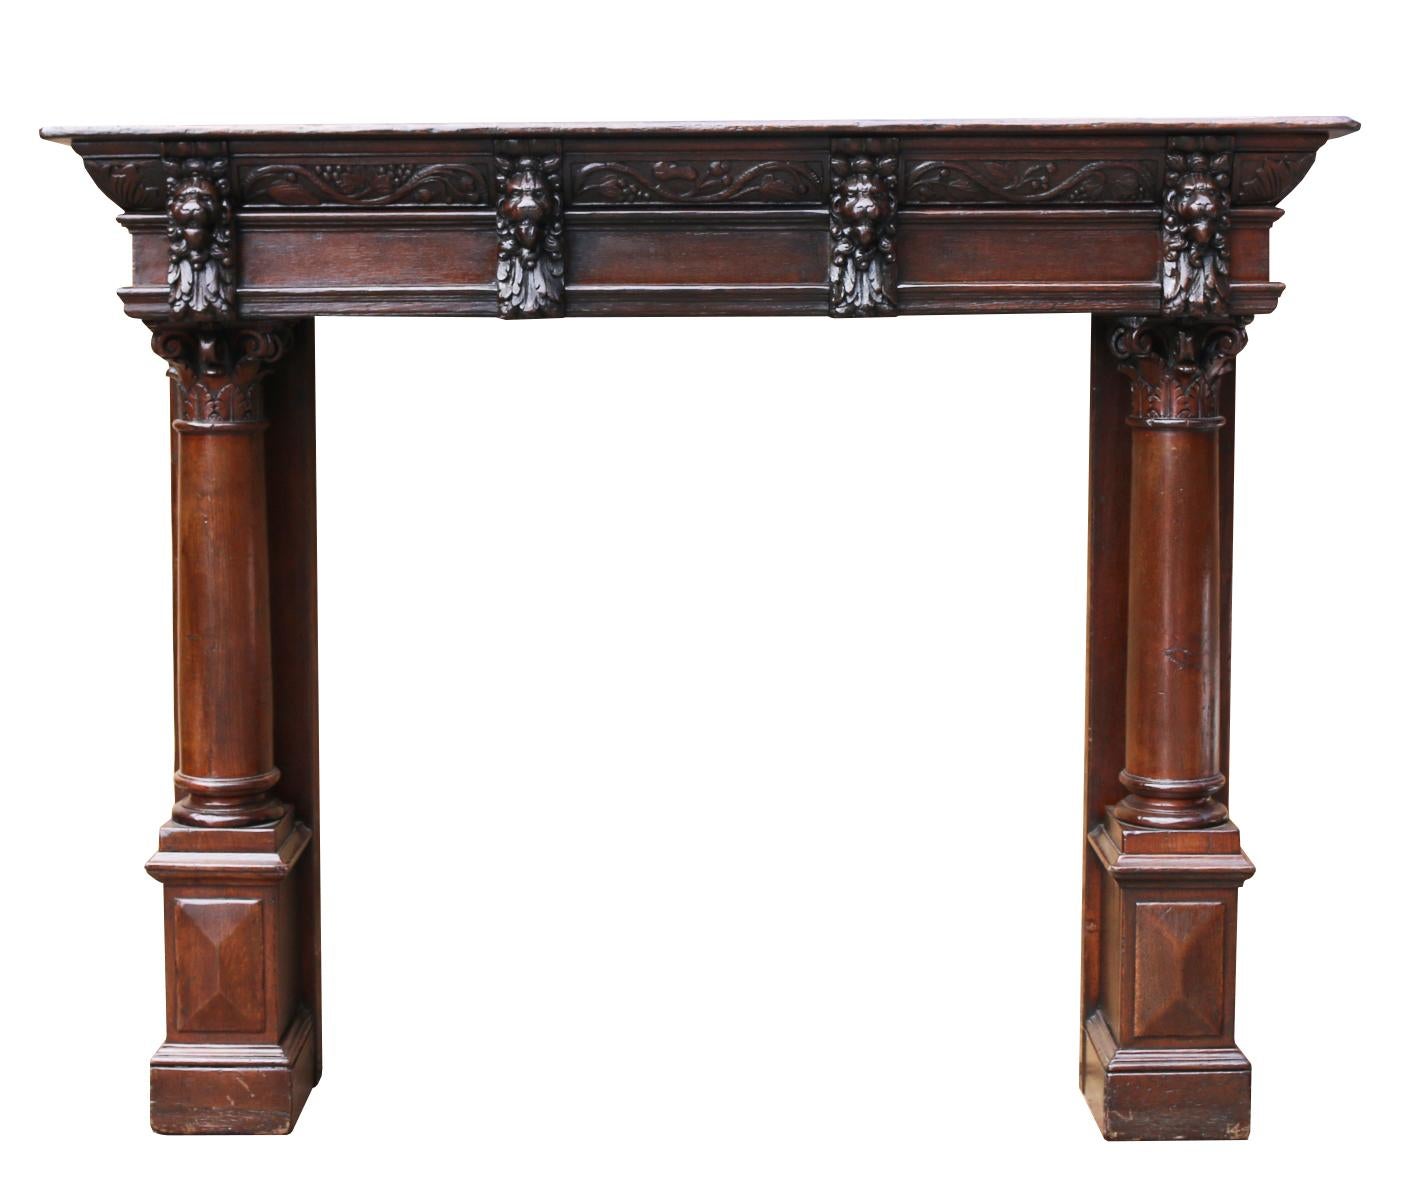 A good quality mid-Victorian, Jacobean style fire surround. Carved cornice with carved lion heads beneath, column supports.

Measure: Opening Height 112 cm

Opening Width 110 cm

Width Between Legs 151 cm.